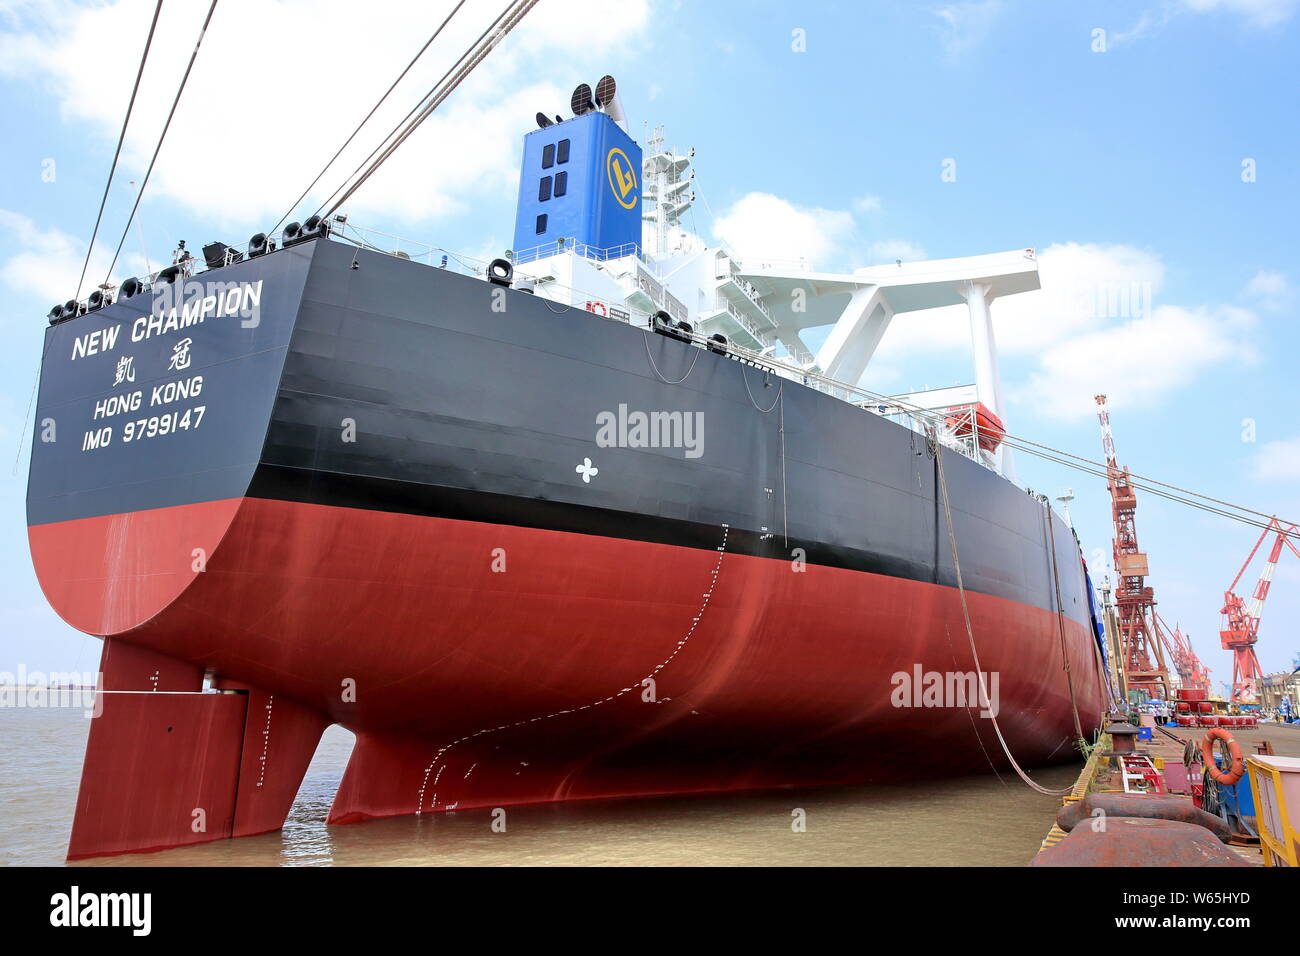 The new 308,000 dwt very large crude carrier (VLCC) "New Champion"  constructed by shipbuilder Nantong Cosco KHI Ship Engineering (NACKS) is  pictured a Stock Photo - Alamy